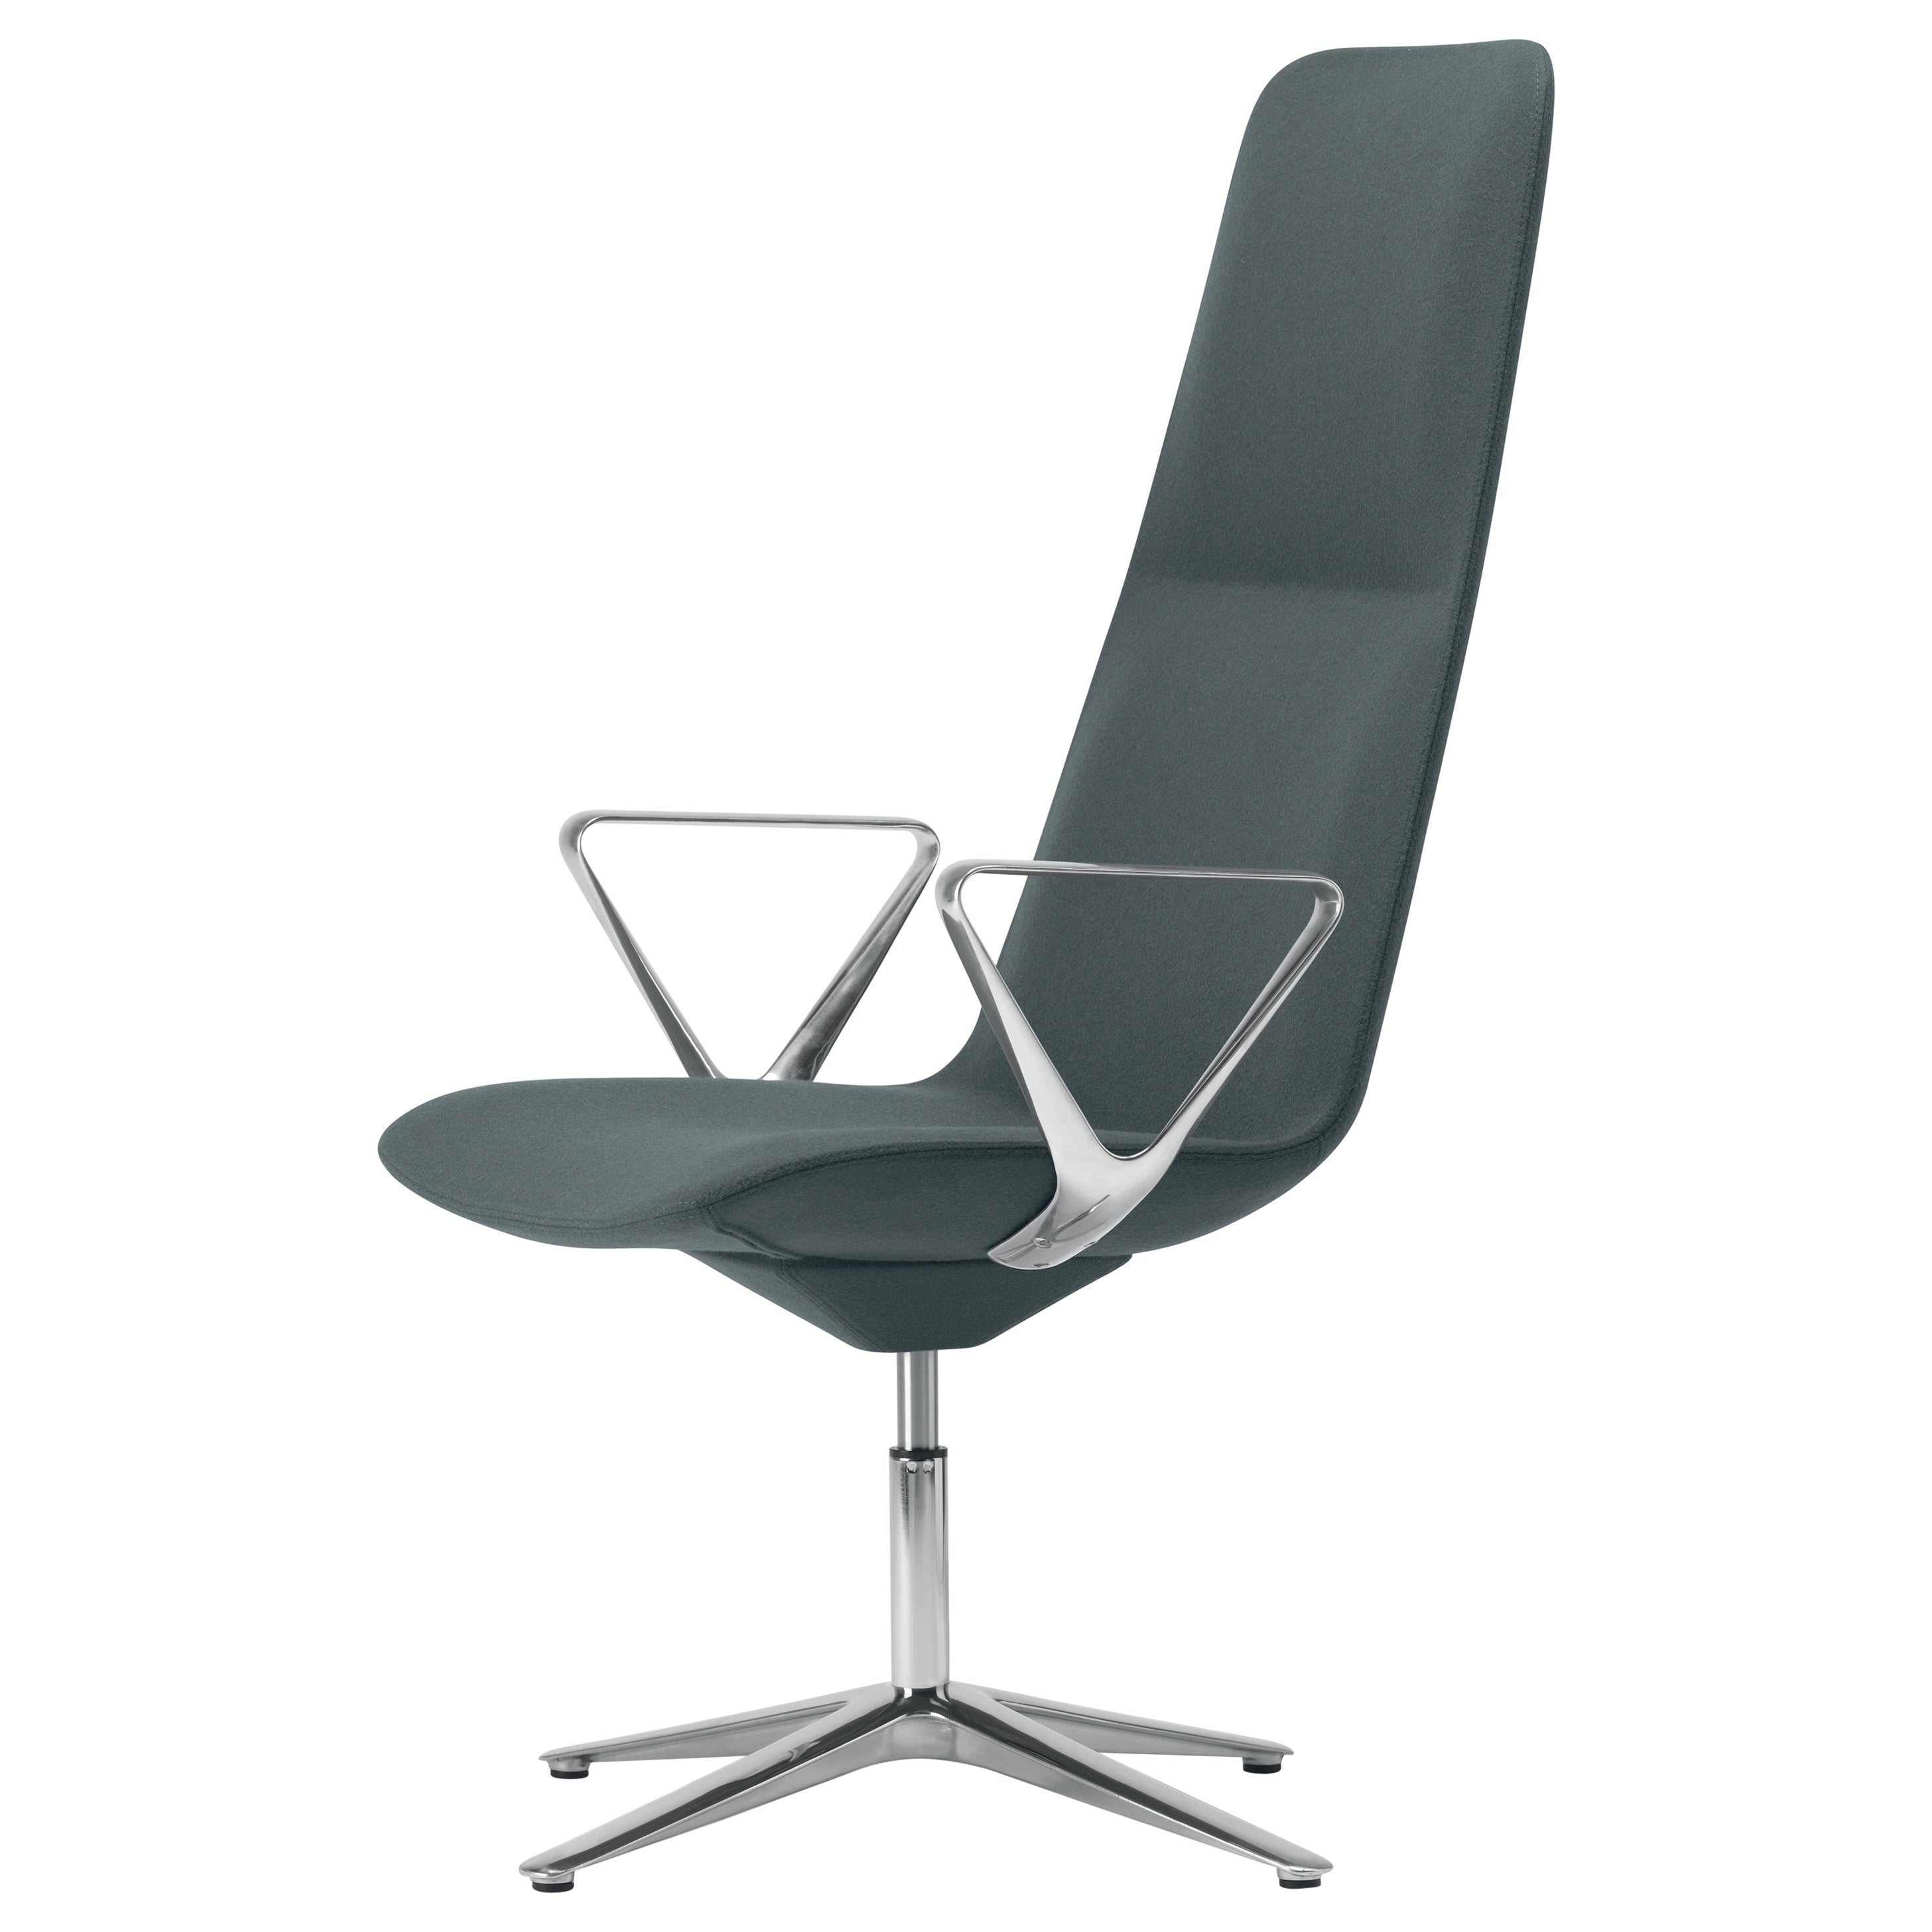 Alias 813 Slim Conference High 4 Y Shaped Chair with Polished Aluminum Frame For Sale